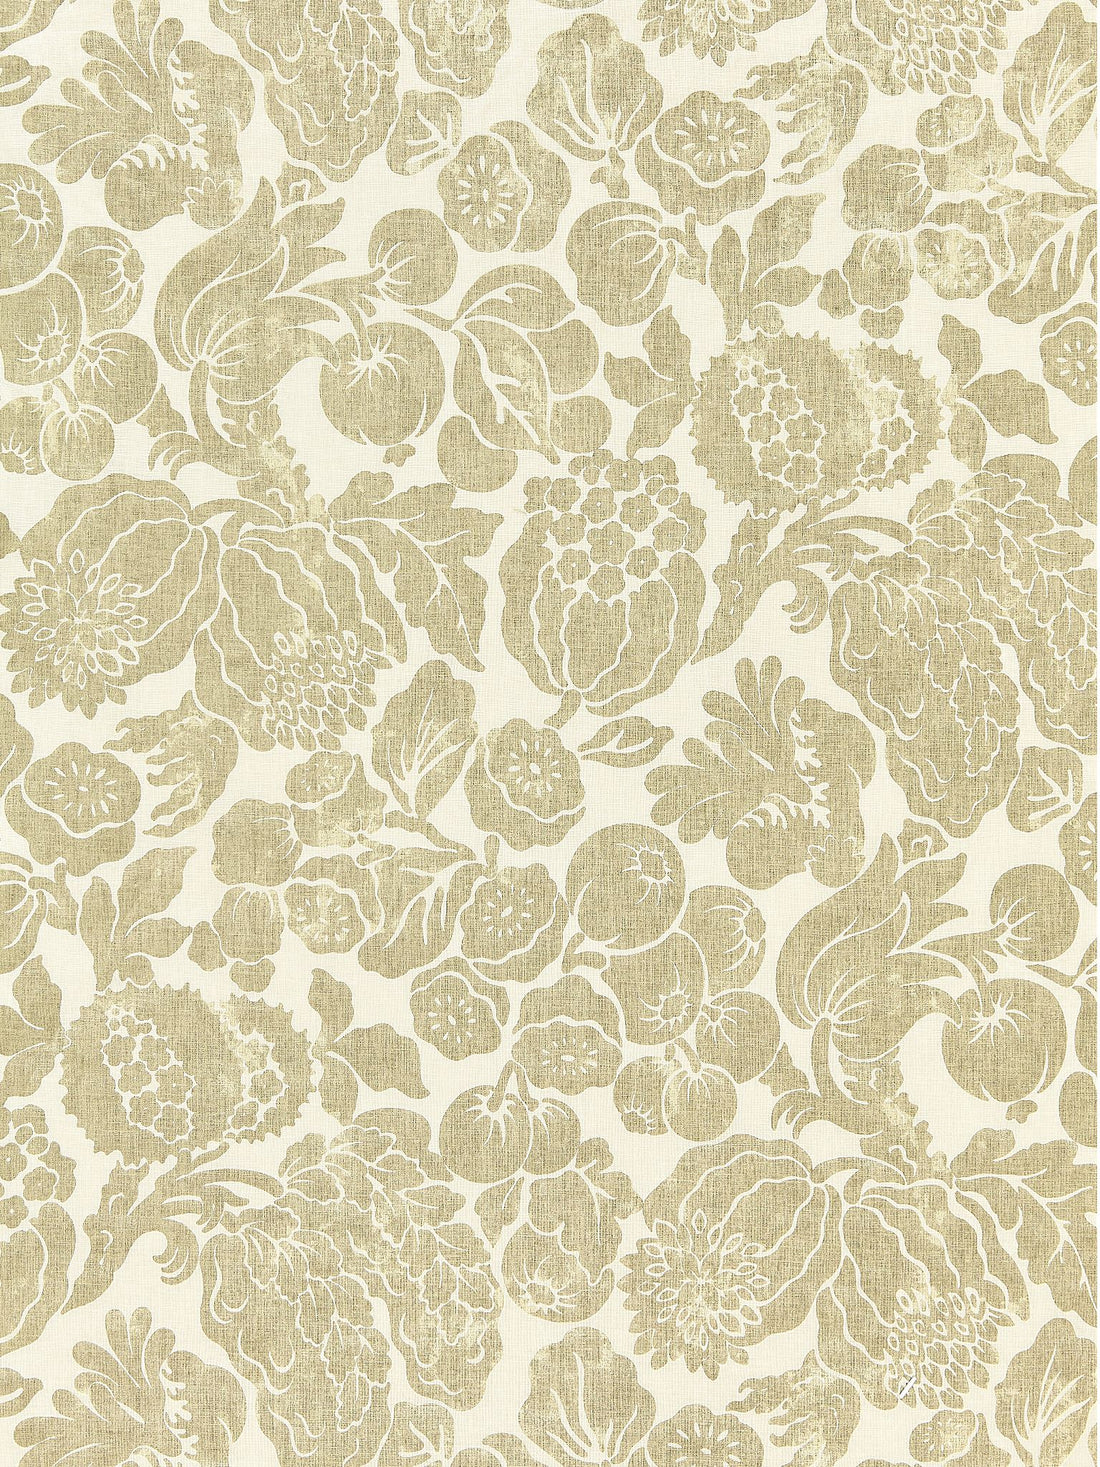 Elsa Linen Print fabric in burnished gold color - pattern number SC 000116606 - by Scalamandre in the Scalamandre Fabrics Book 1 collection